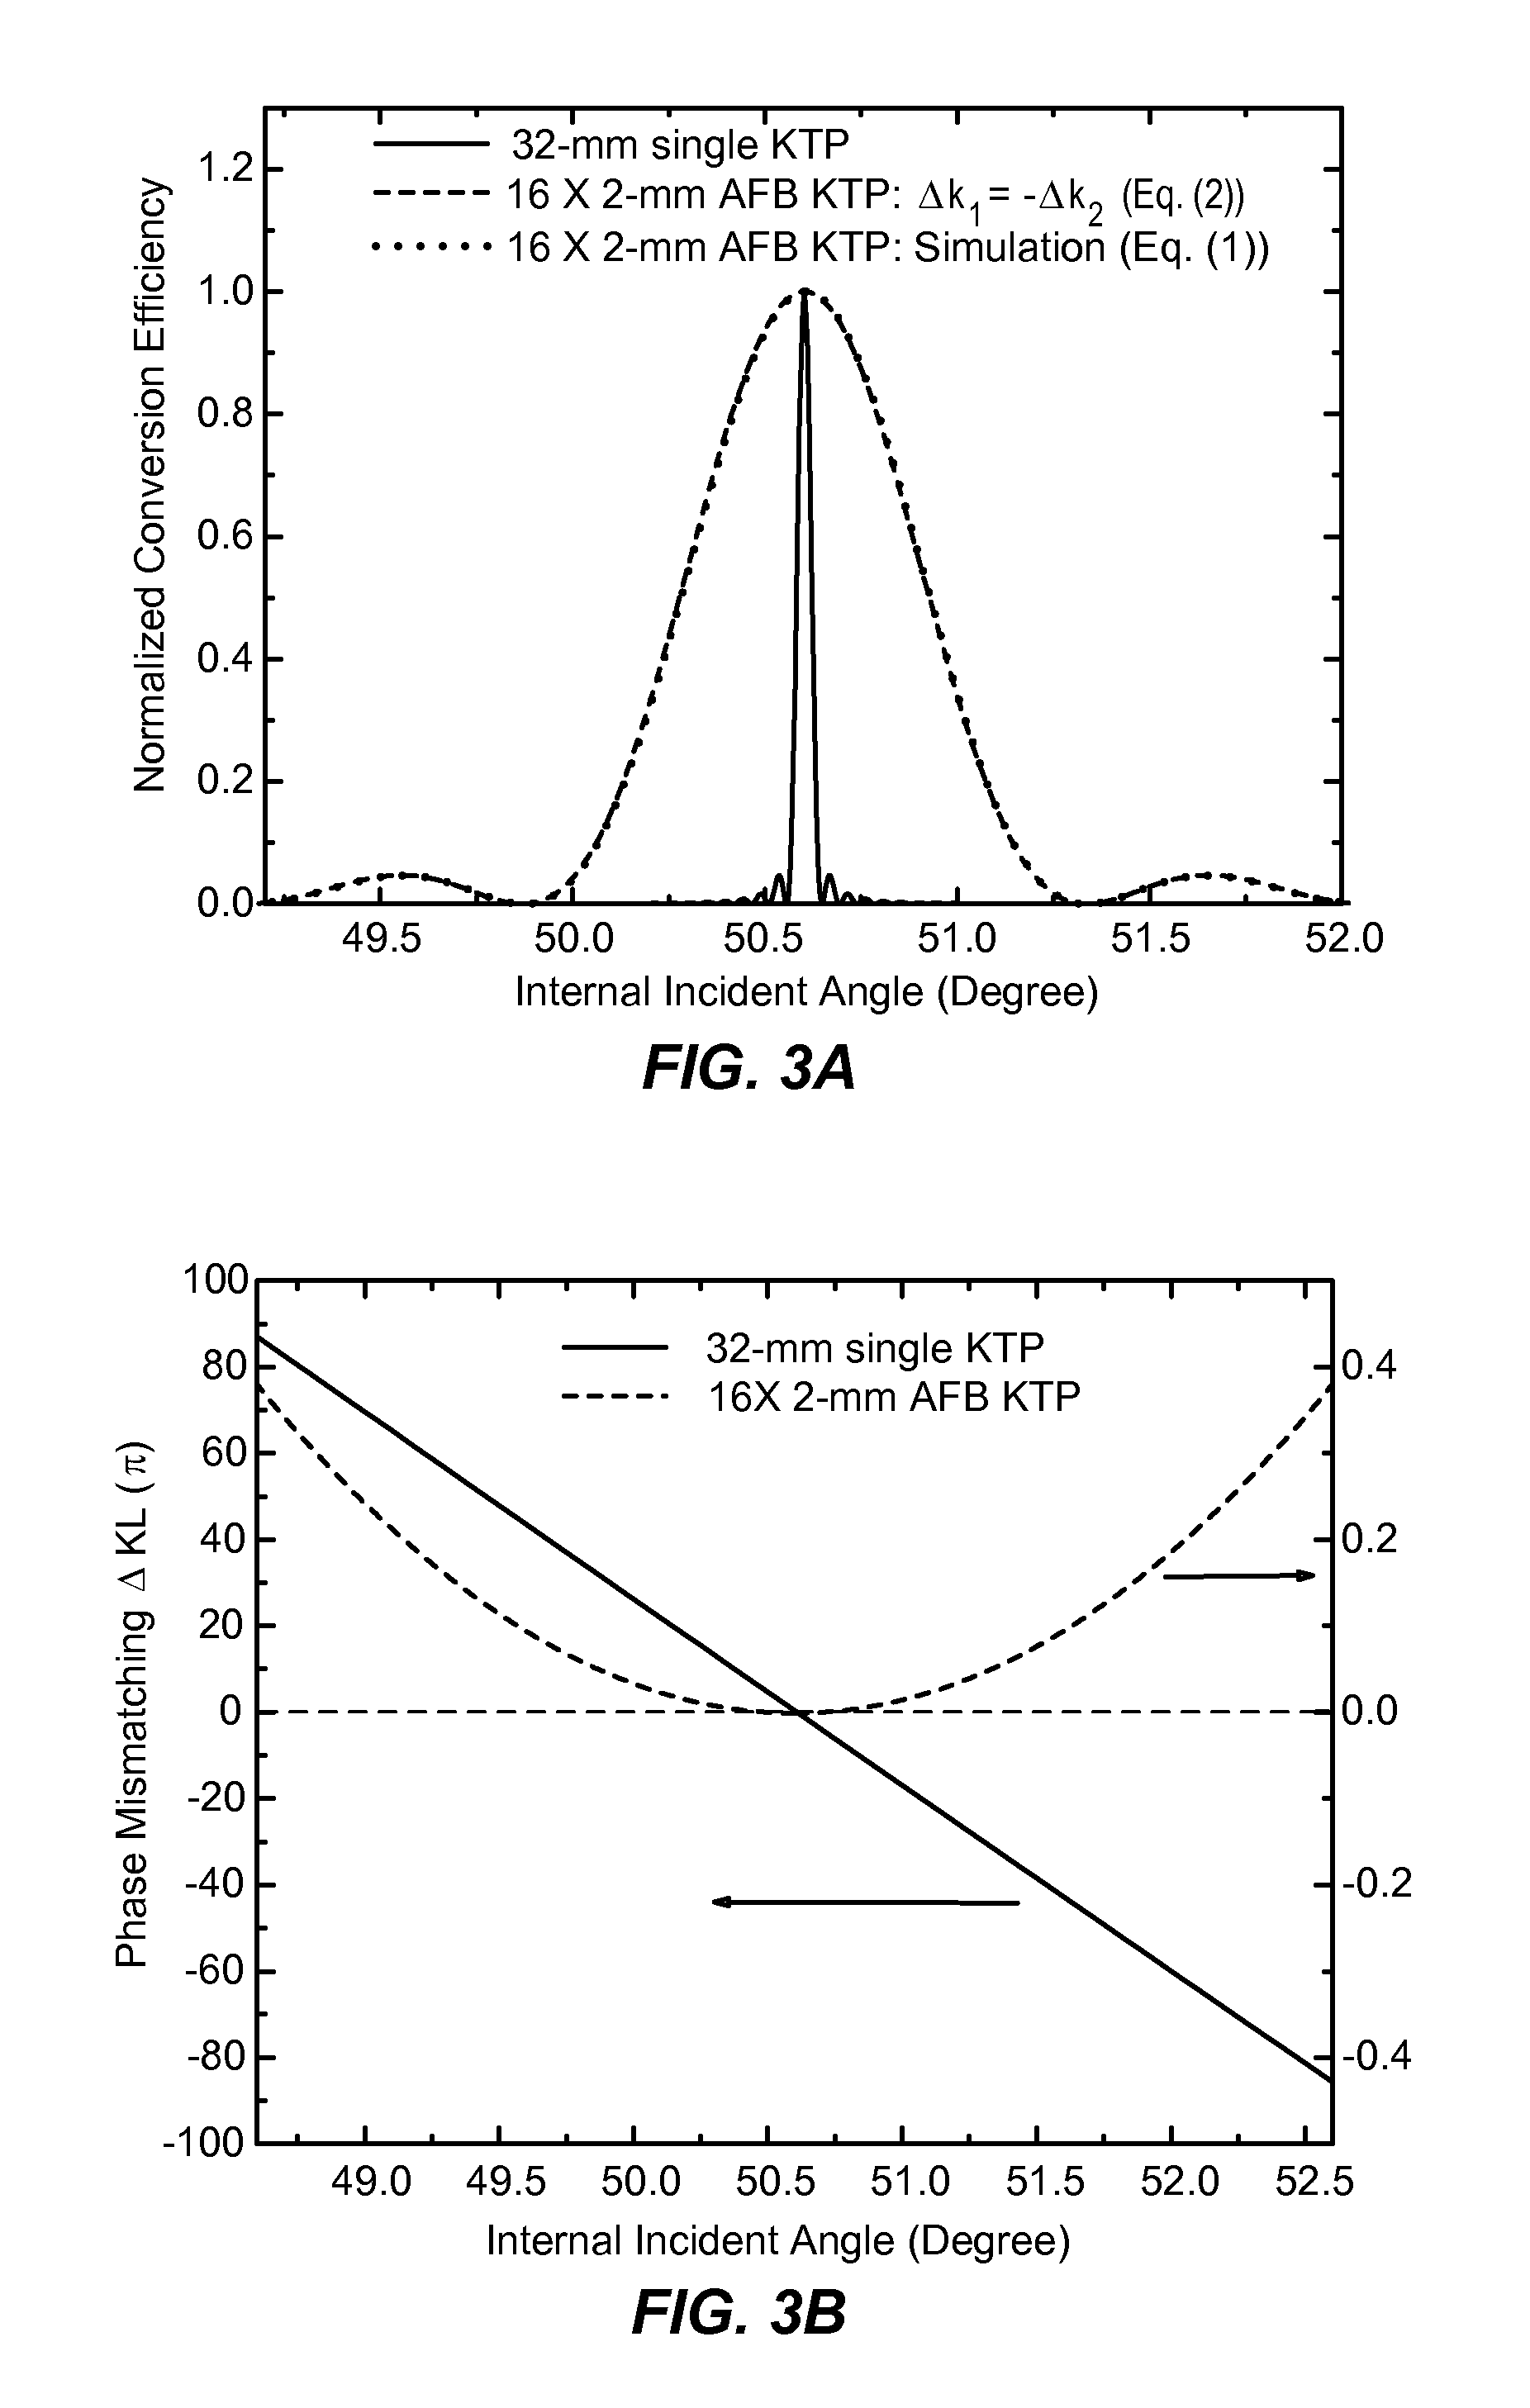 Quasi non-critical phase matched and contra-phase matched structures